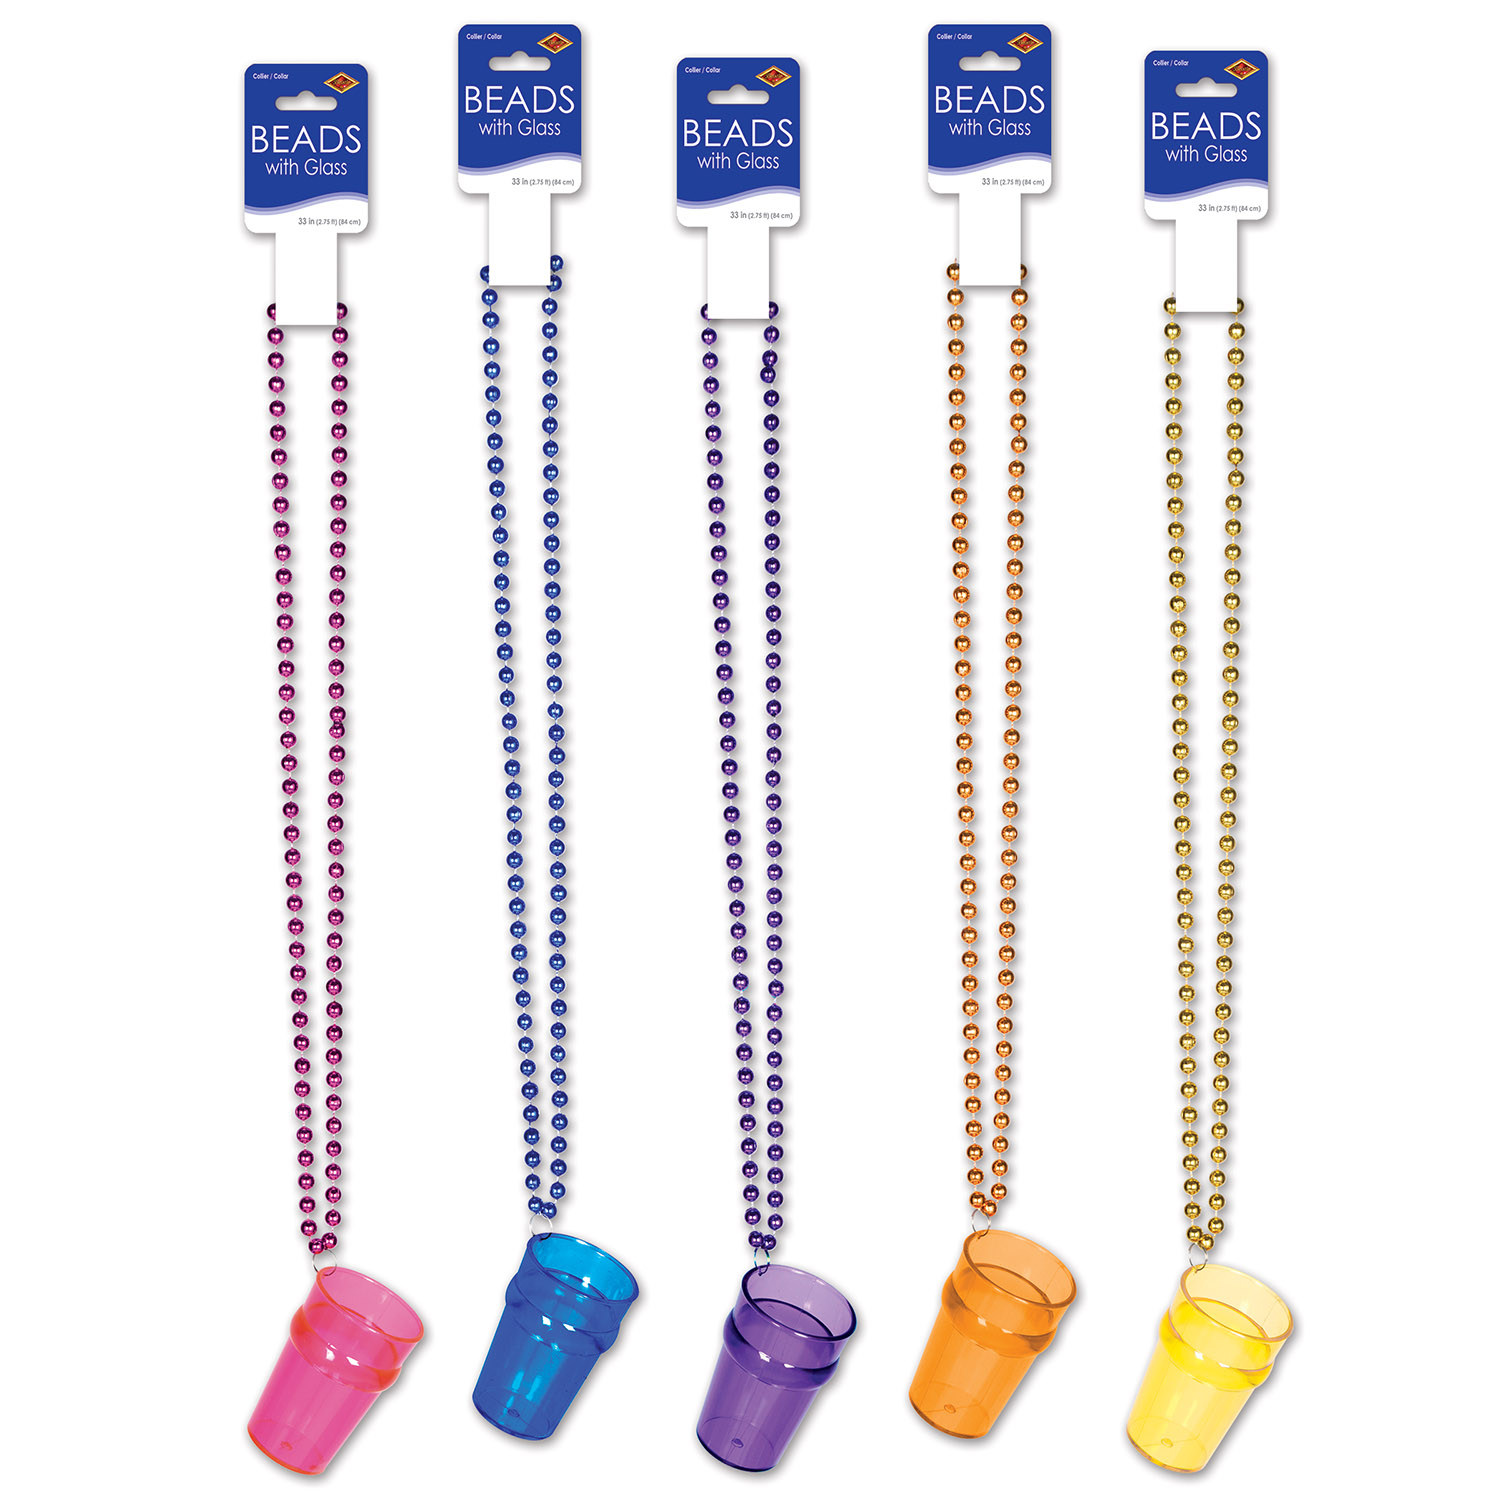 Pink, blue, purple, orange, and yellow party beads with matching colored, plastic shot glass. 